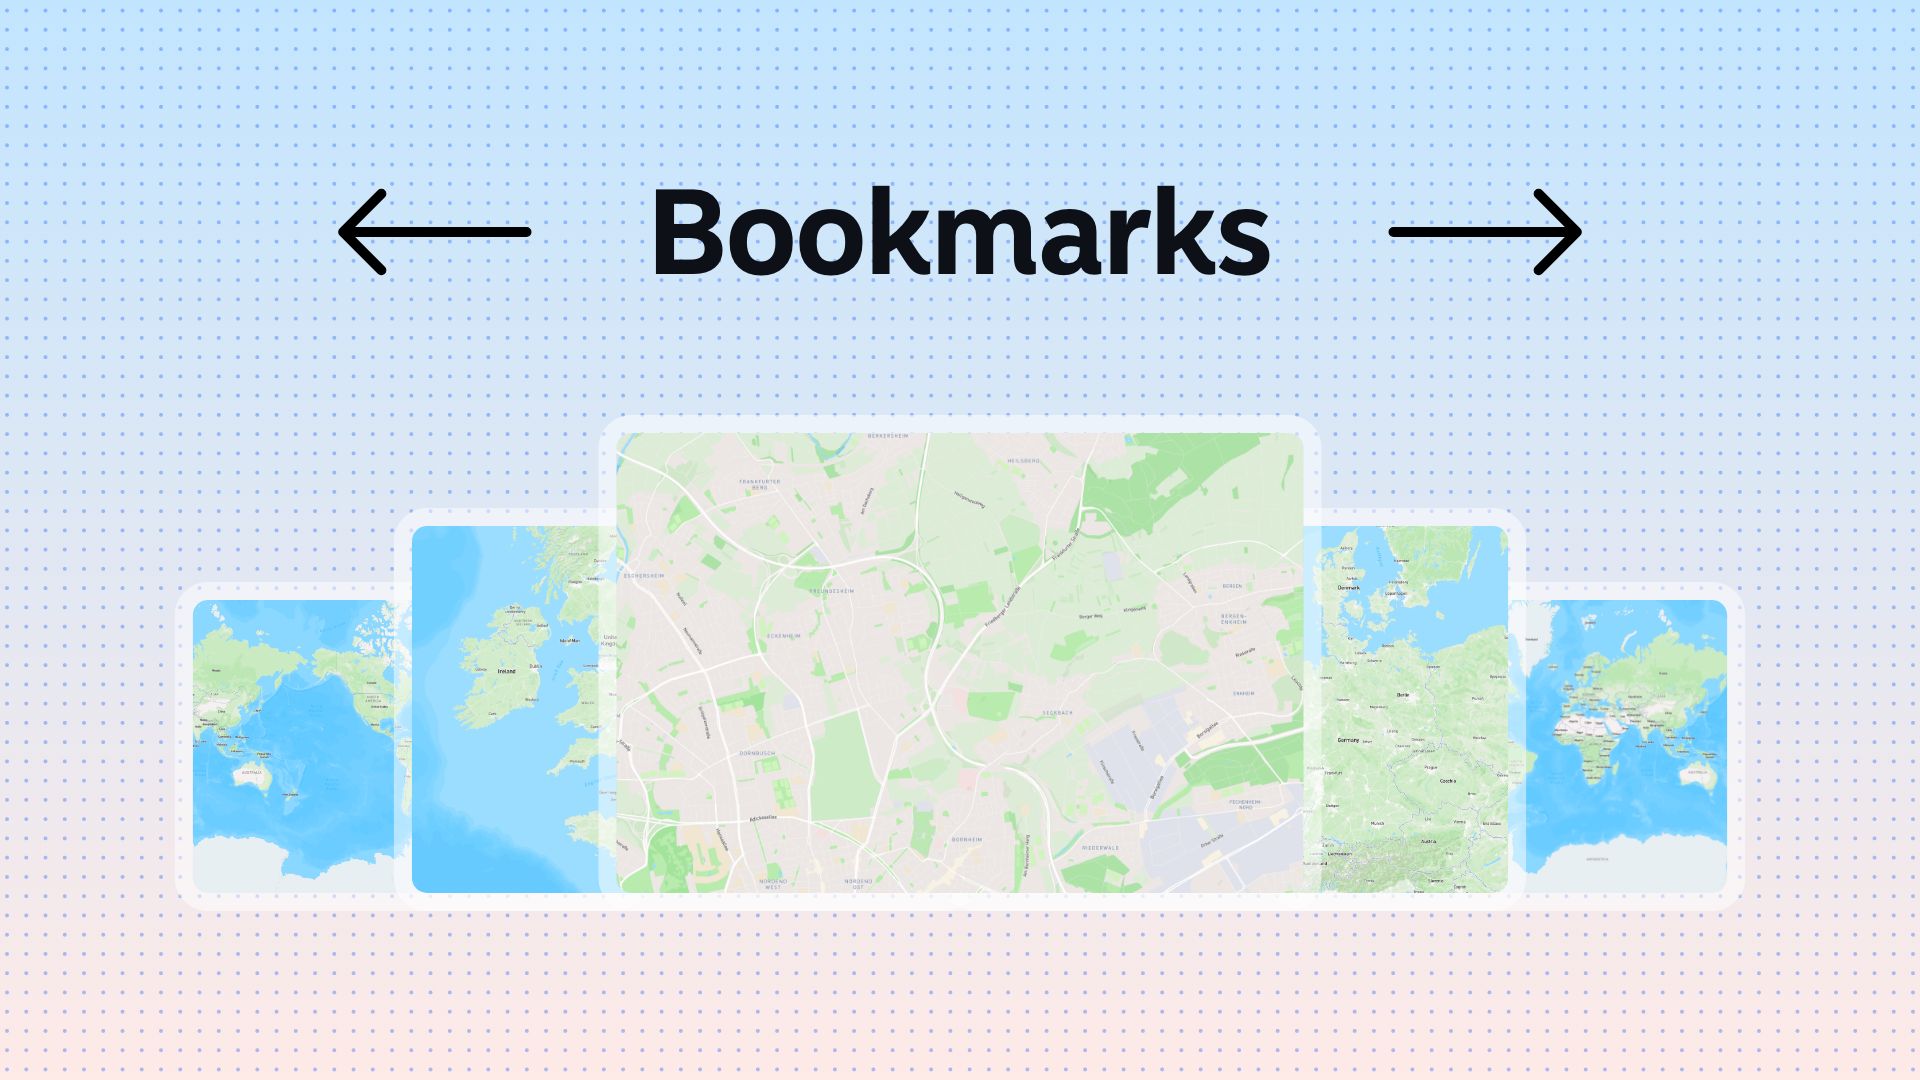 Bookmarks - Shortcuts to Interesting Places